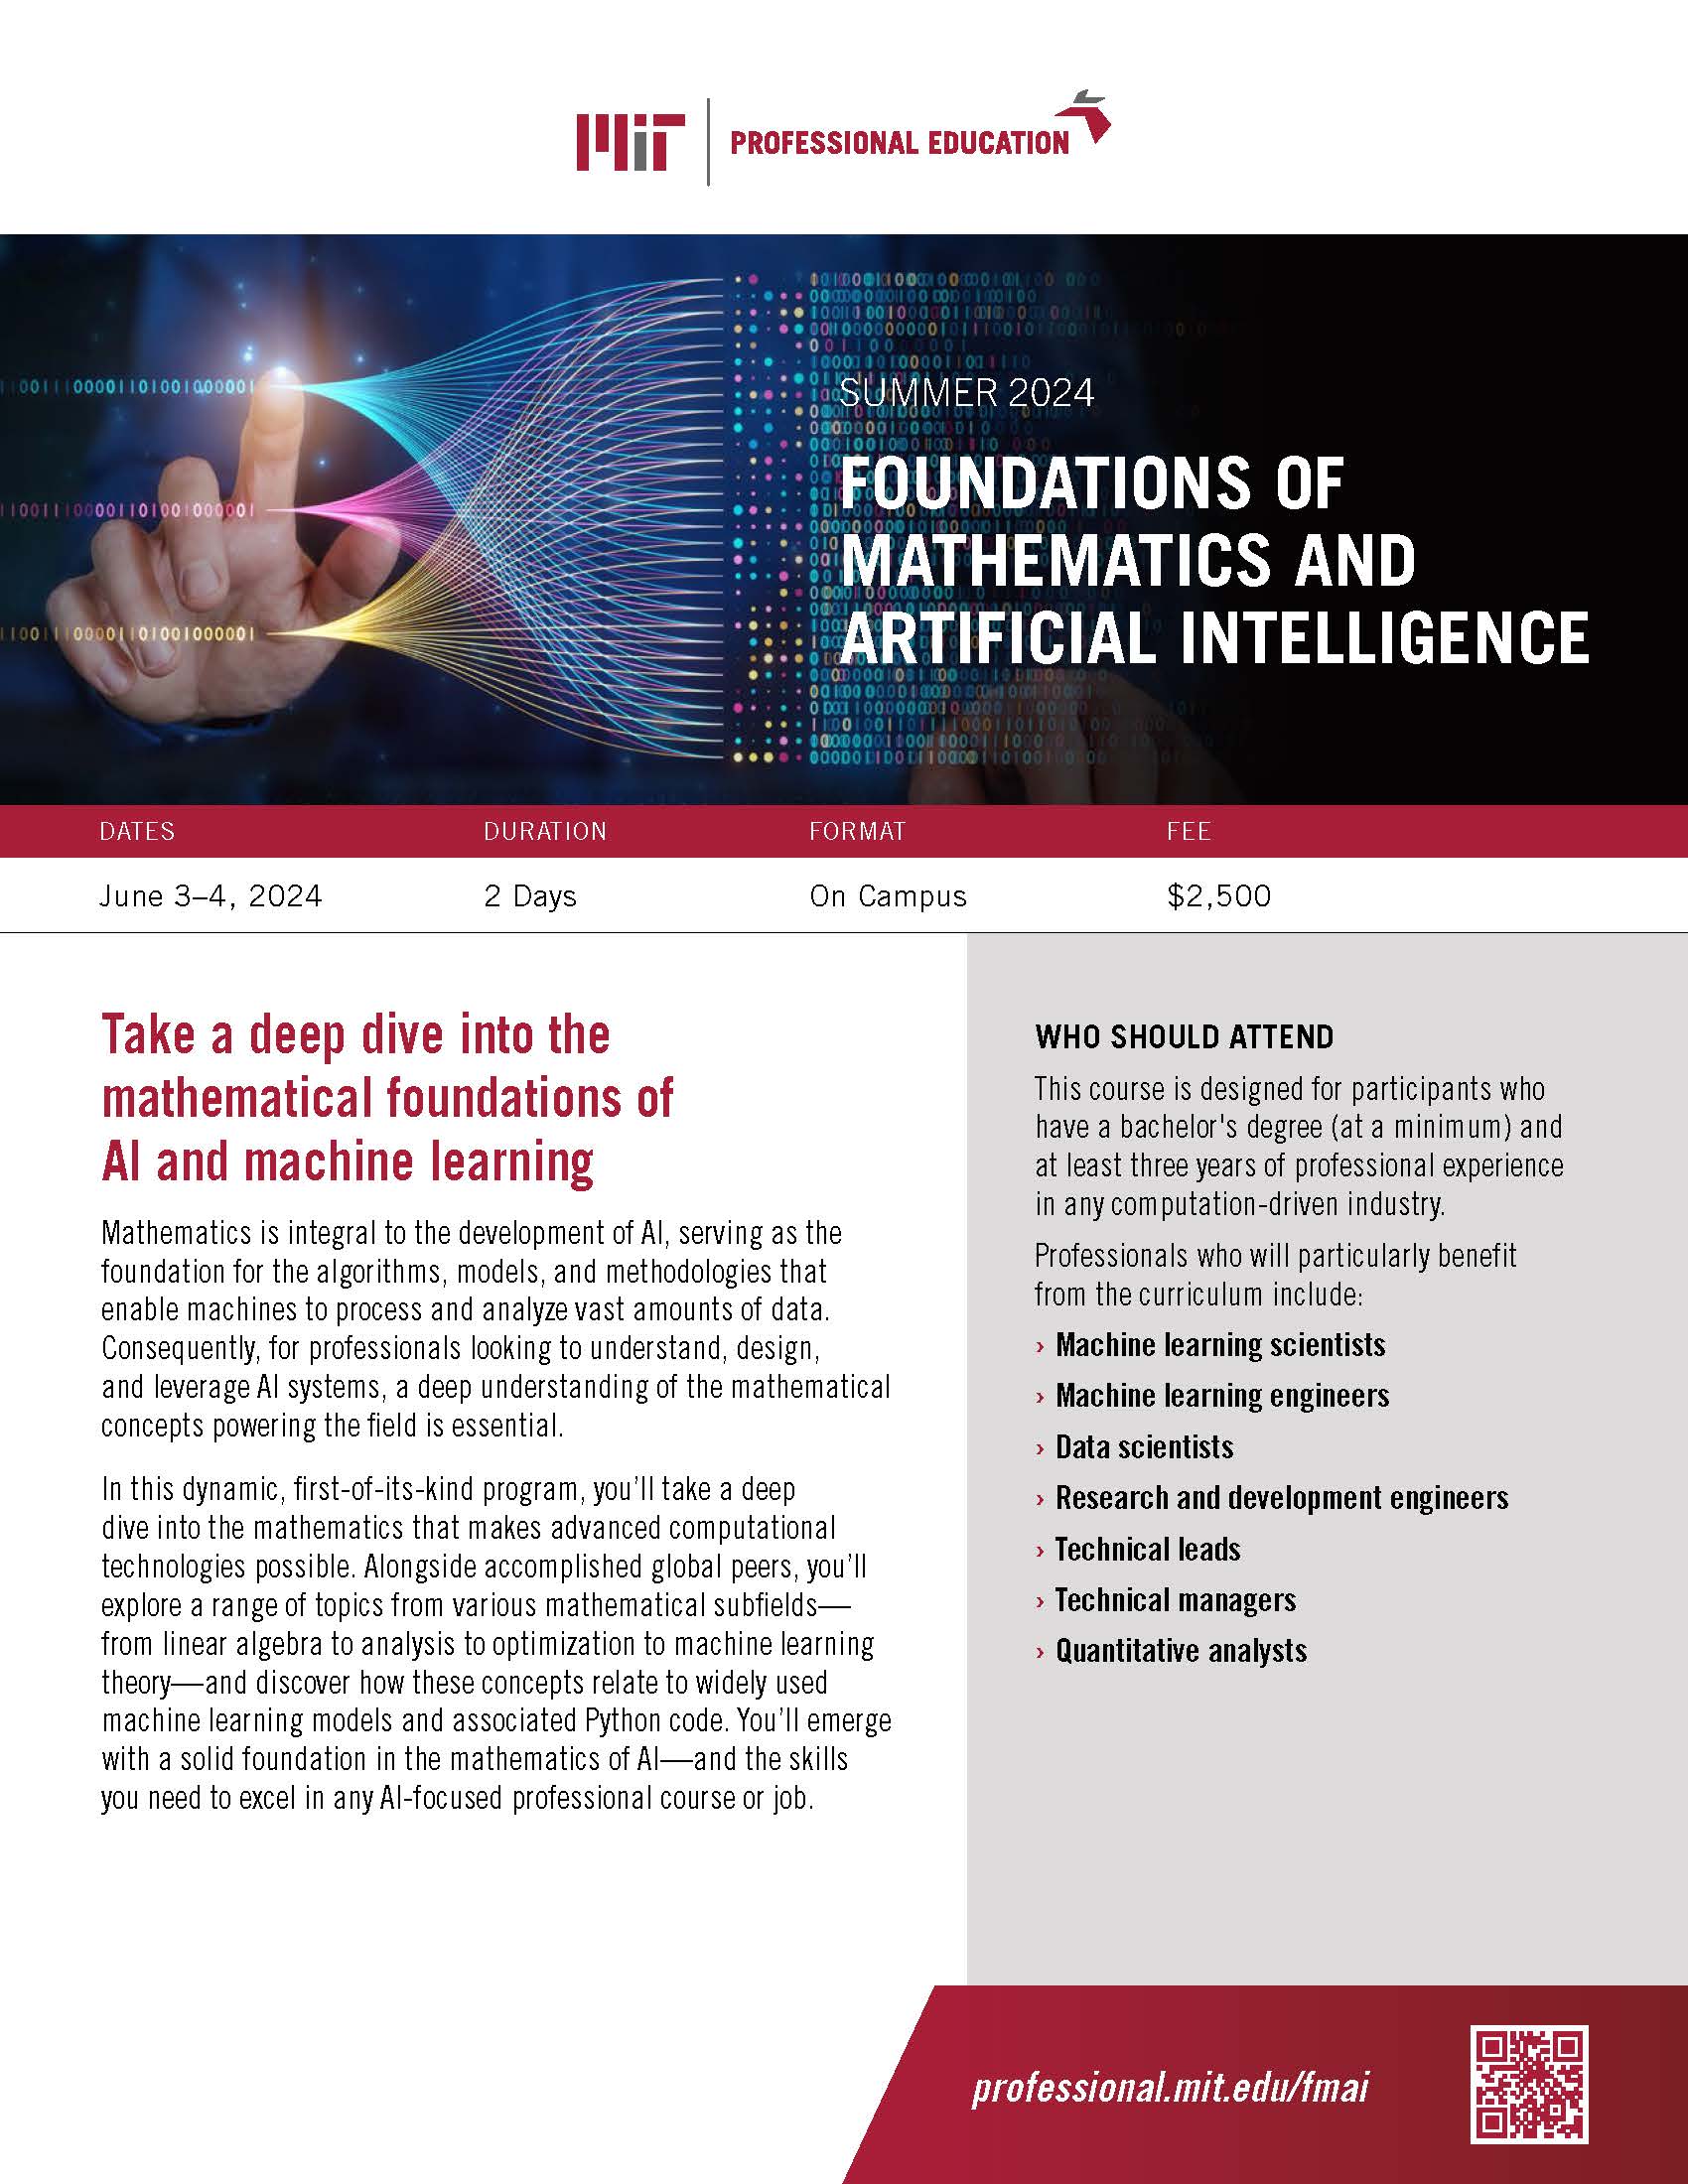 Foundations of Mathematics for Artificial Intelligence - Brochure Thumbnail